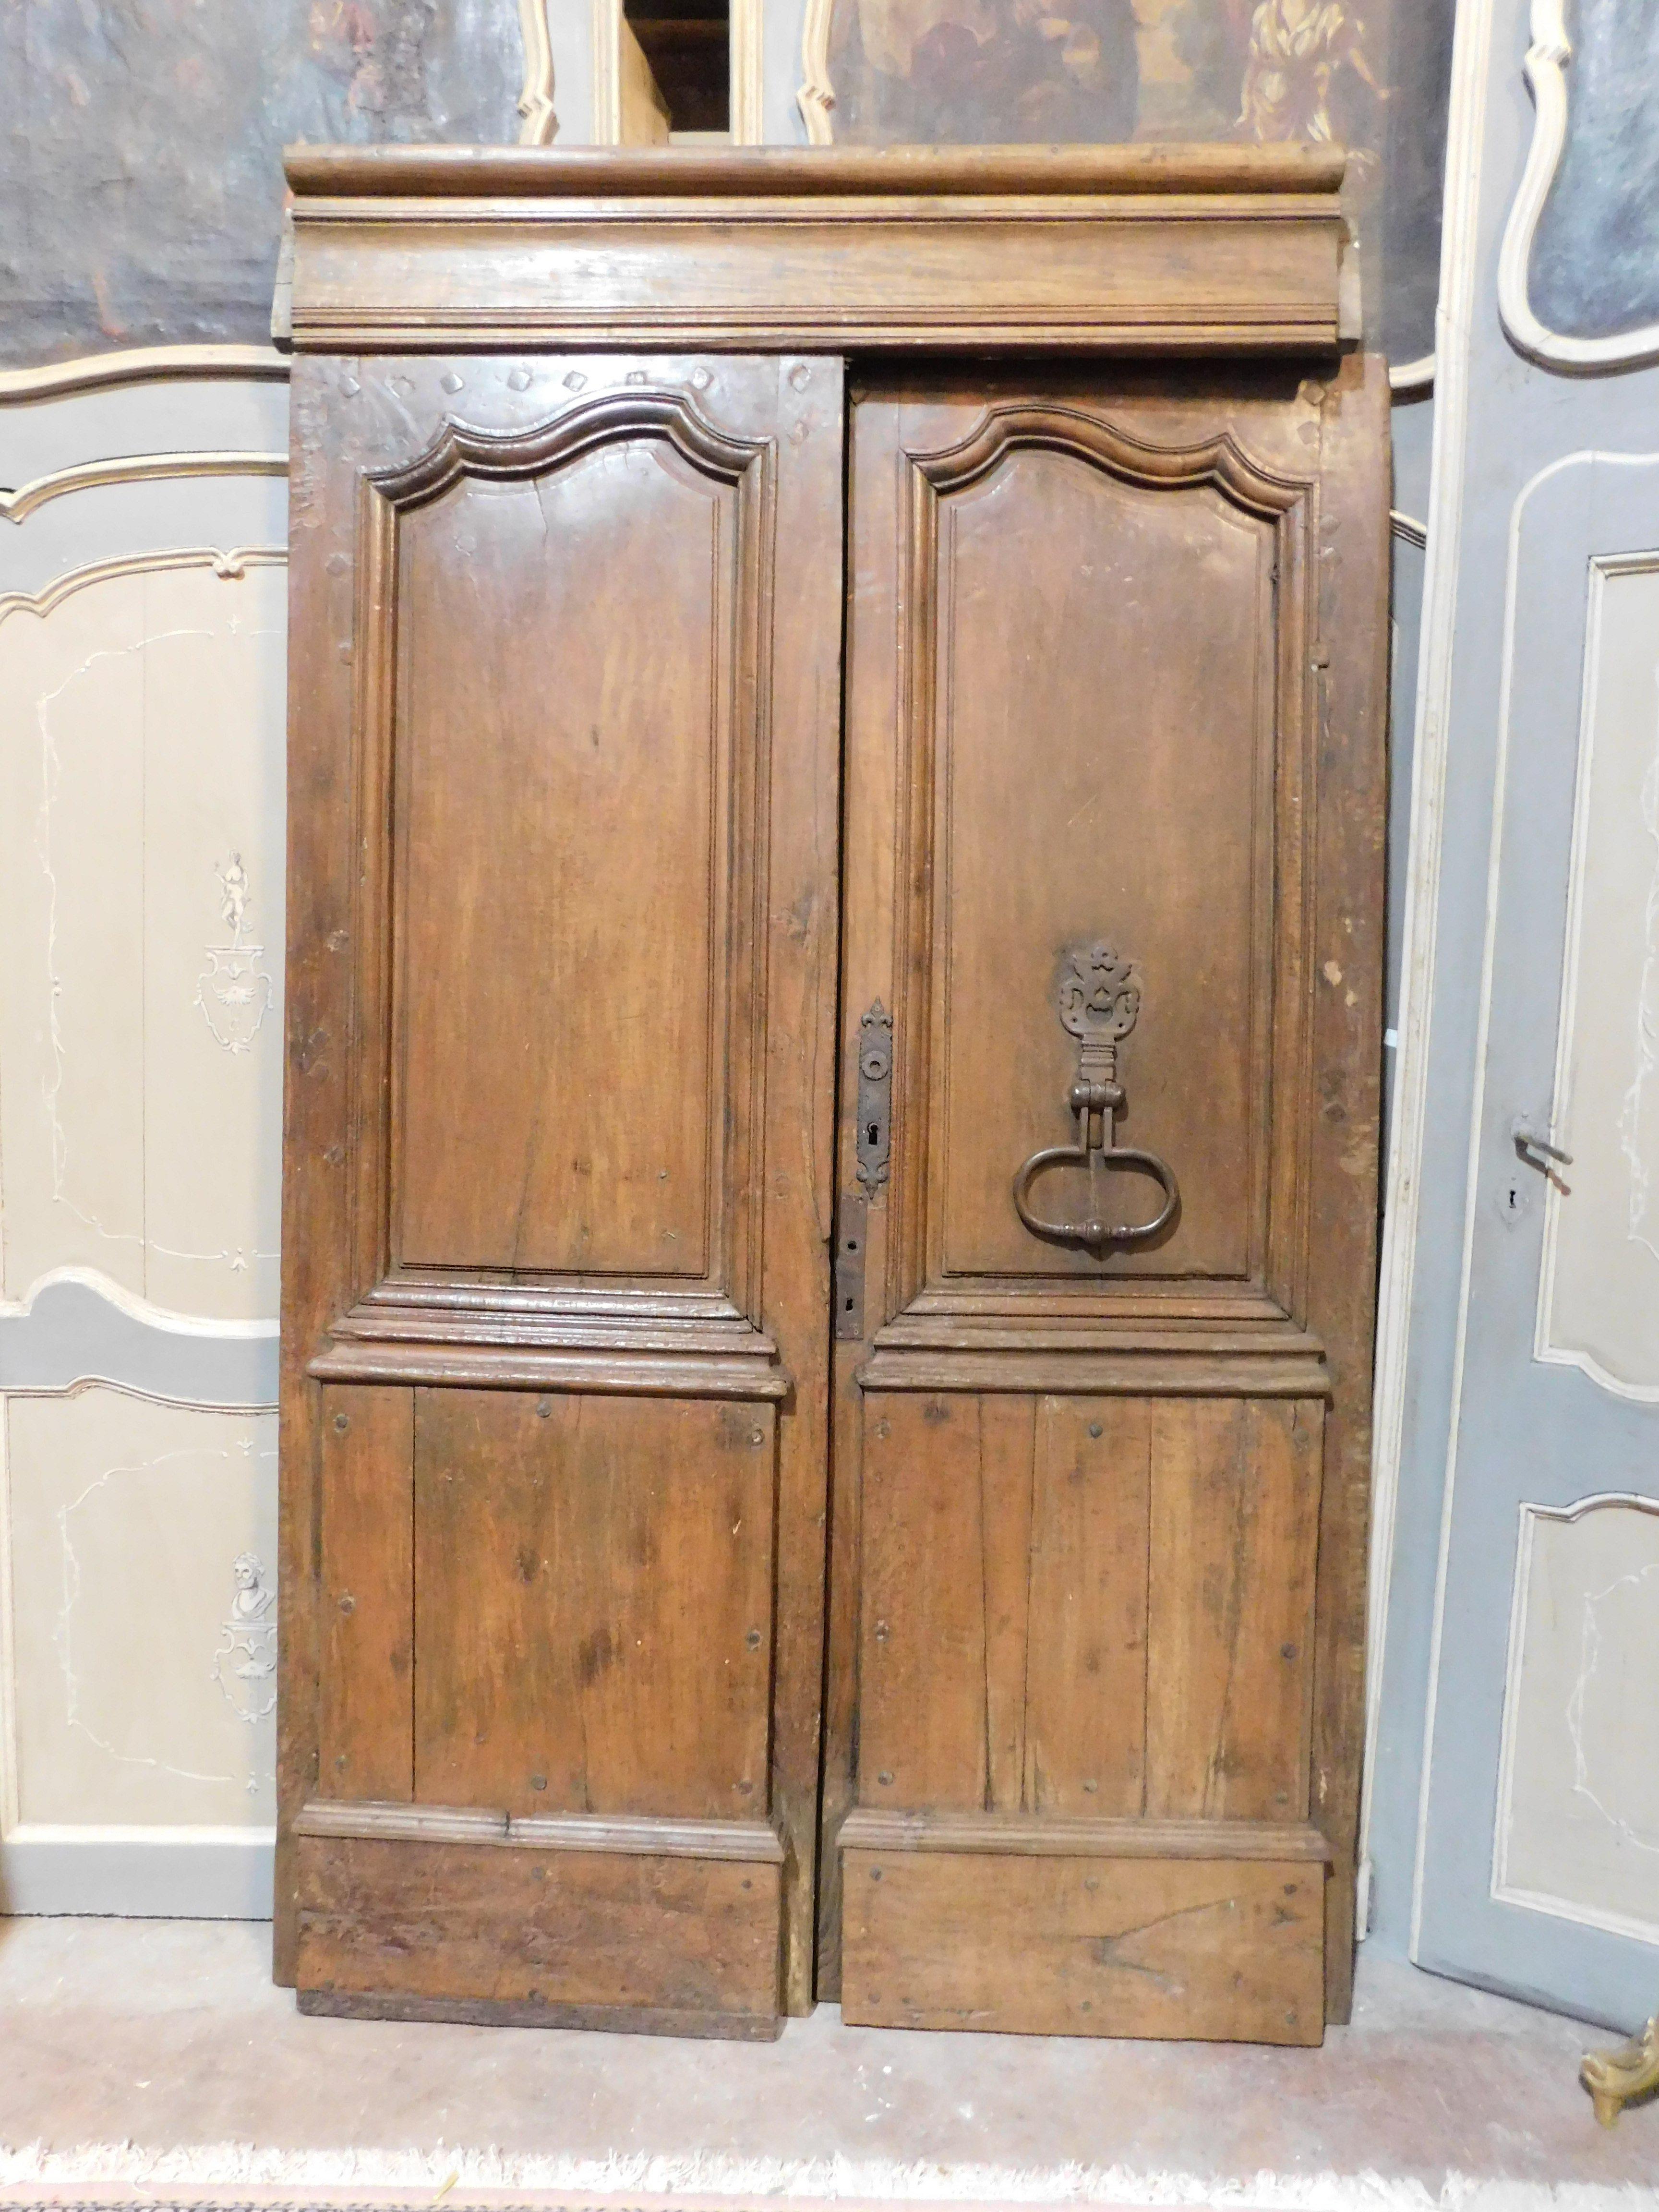 Ancient antique old entrance door, double wing main door, hand-carved and built in precious solid walnut wood, complete with original removable beam above the door, built in the middle of the 18th century in Italy, maximum dimensions cm w 150 x H